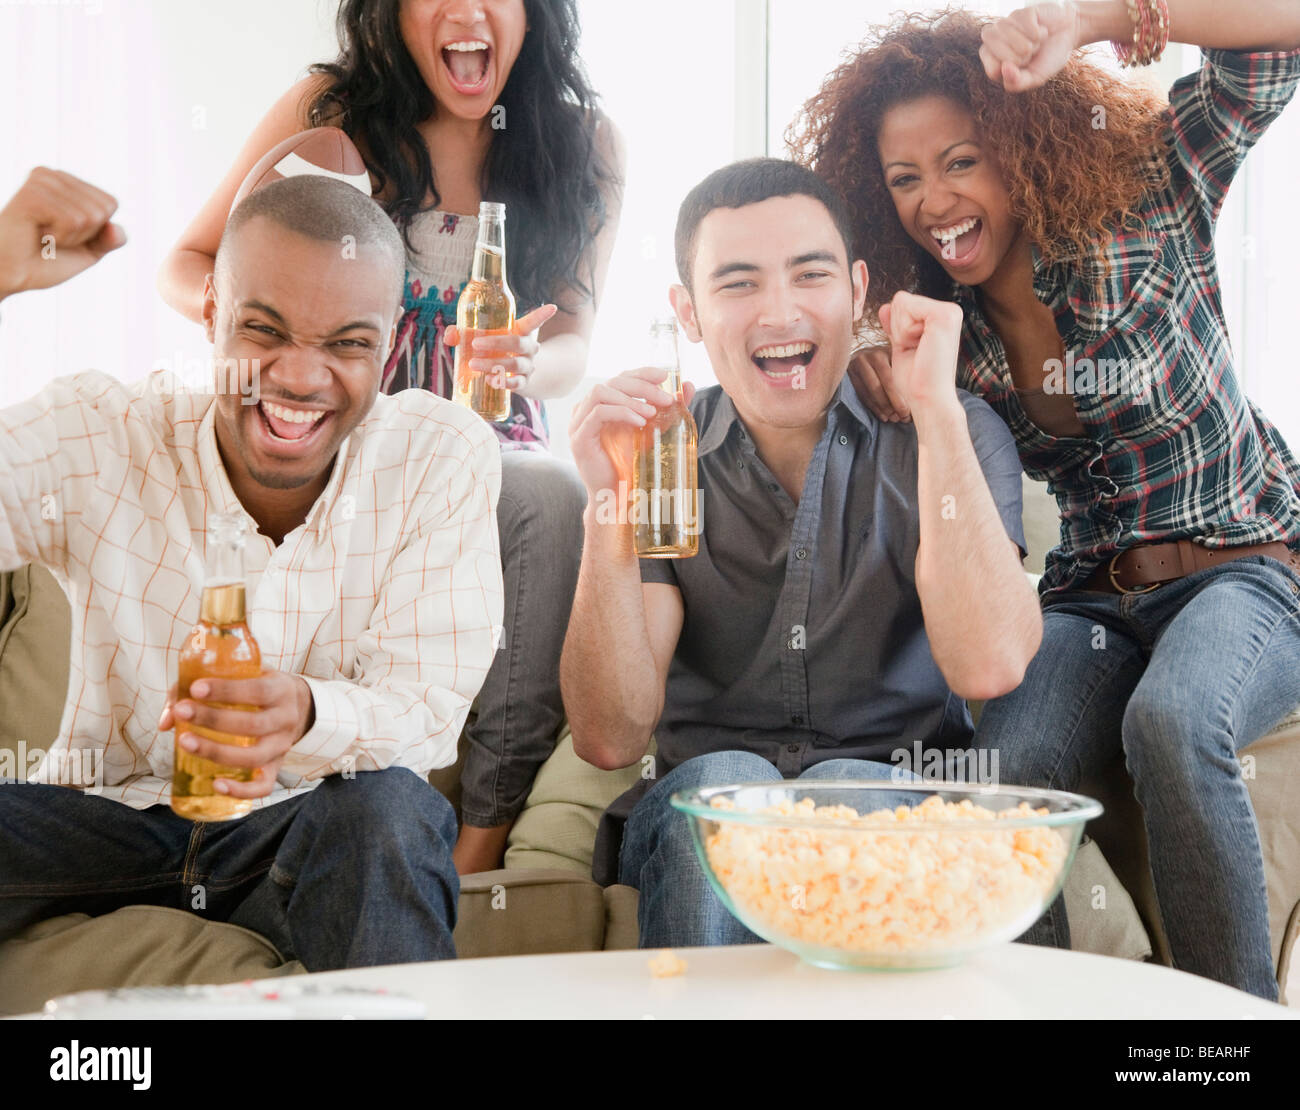 Friends drinking beer and watching football on television Stock Photo